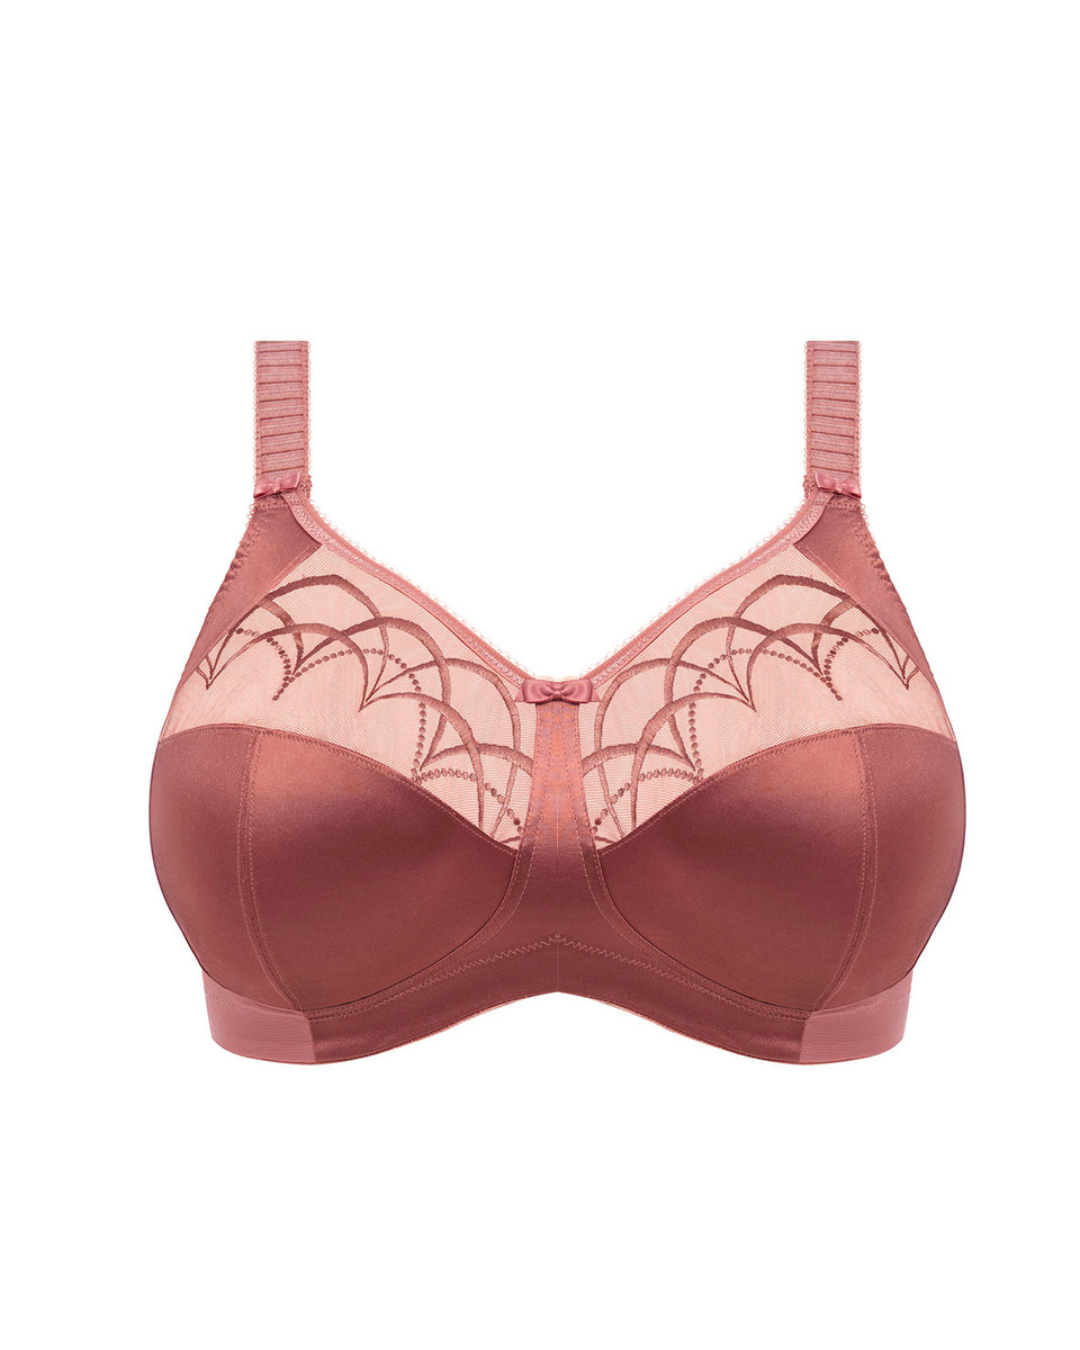 Elomi Cate Soft Cup Bra in Rosewood with sheer embroidery, soft satin cups, and an intersecting arc design. The bra offers three-piece cups with side support for shaping, uplift, and separation. It features a wide elastic underband, flexible side boning, and powernet wings for enhanced support. Complete with charming bow details, this bra combines elegance and comfort.